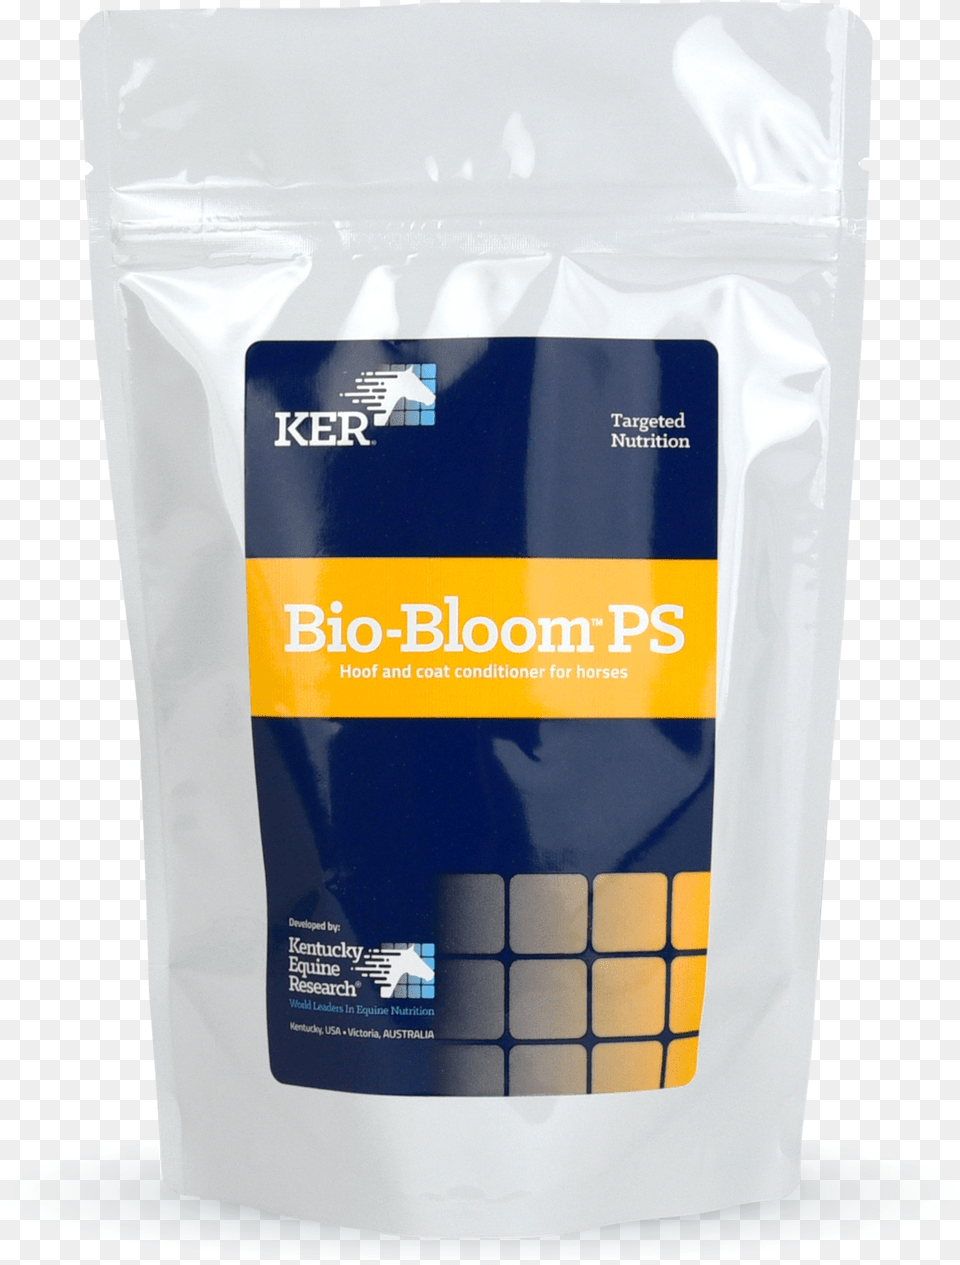 Bio Bloom Ps Hoof And Coat Supplement For Horses Vacuum Bag, Paint Container, Bottle, Can, Tin Png